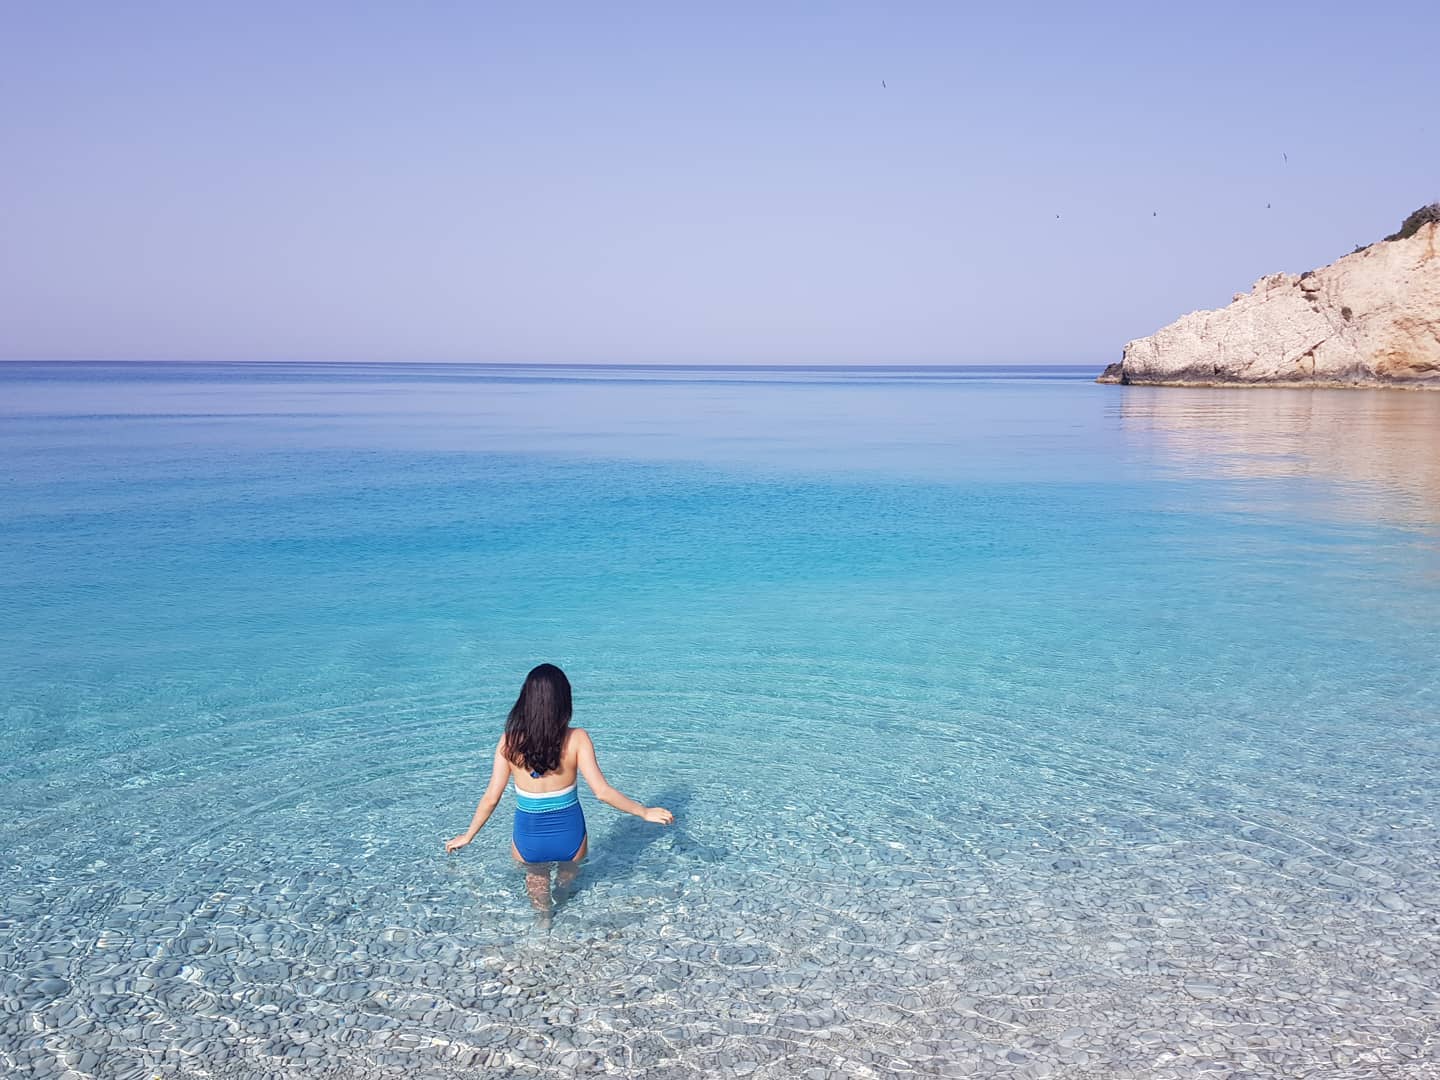 #바다에풍덩 하고 싶은 날씨 🏖️
Yesterday and today are the hottest days of the year so far... and I could do with a quick swim at a beach right now! 💦
This photo was from our holiday in Greece, last June. The water was warm from the morning, which allowed us to enjoy the beach at a quiet time, and before it became way too hot to be pleasant.
Realistically, I doubt I'll have any beach time this year, so got to think about alternative summer fun ideas... Has anyone got a plan for this summer? 🙋
⠀
어제, 오늘은 올들어 영국에서 제일 더운 날💦 2월말에 챙겨온 짐으로 여태 생활 중이라 현재 가지고 있는 여름 옷이 거의 없고, 그나마 있는 것도 안 맞아서 퍽 곤란하다.😂
작년 6월 중순에 다녀온 그리스는 오늘 이곳 날씨보다 더 덥고 습했다. 그래도 사람들 없는 아침 시간에 가서, 수영해도 차갑지 않았던 바다가 참 좋았는데.. 지금 딱 눈앞에 이 바다가 펼쳐져 있었음 좋겠다. 바라만 봐도 더위가 가실듯한 기분.... 허허
현실적으로 올해는 바다 구경은 1도 못할 것 같은데, 여름 기분을 뭐로 내면 좋을까 싶다. 여름 계획 세운 분 계신가요? 
#덥다더워 #summerdays #여행추억
⠀
🎒 @seheeintheworld & @joshuapowell_official
📍Lefkada, Greece
🗓️ June 2019